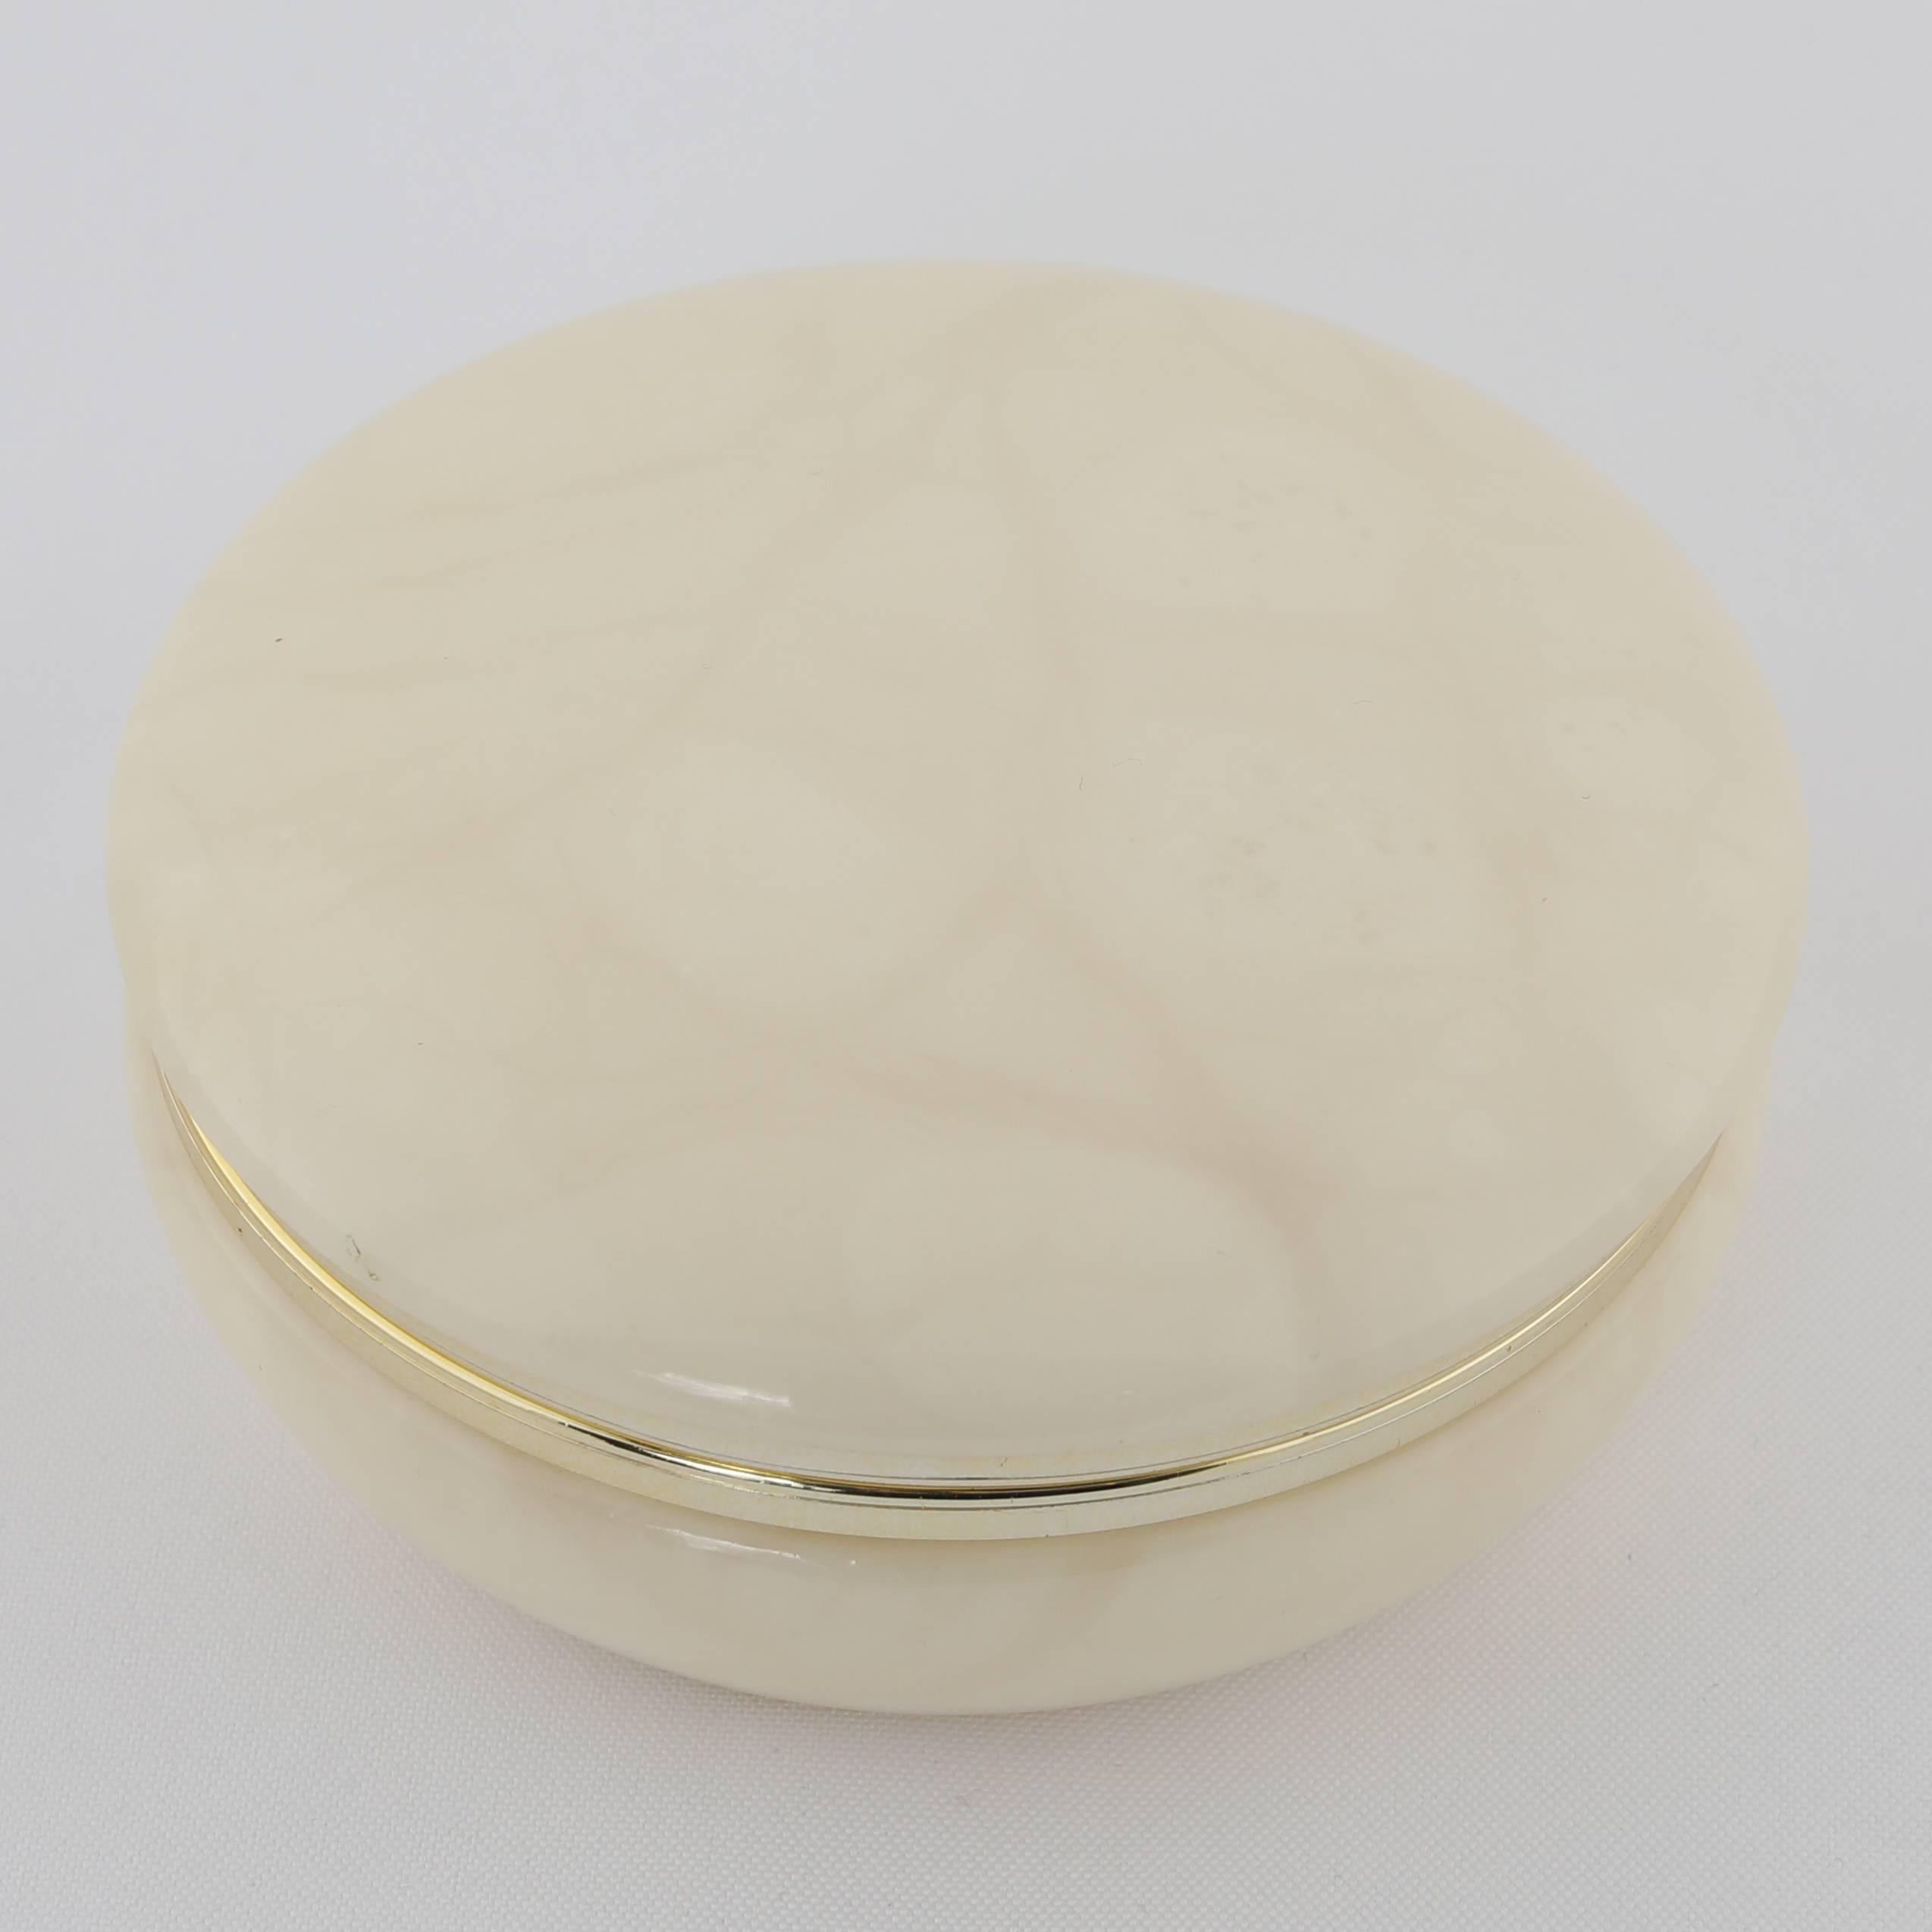 Circular, hand-carved box in a warm, creamy polished alabaster. Shiny brass trim on upper and lower edges. Hinged lid. 